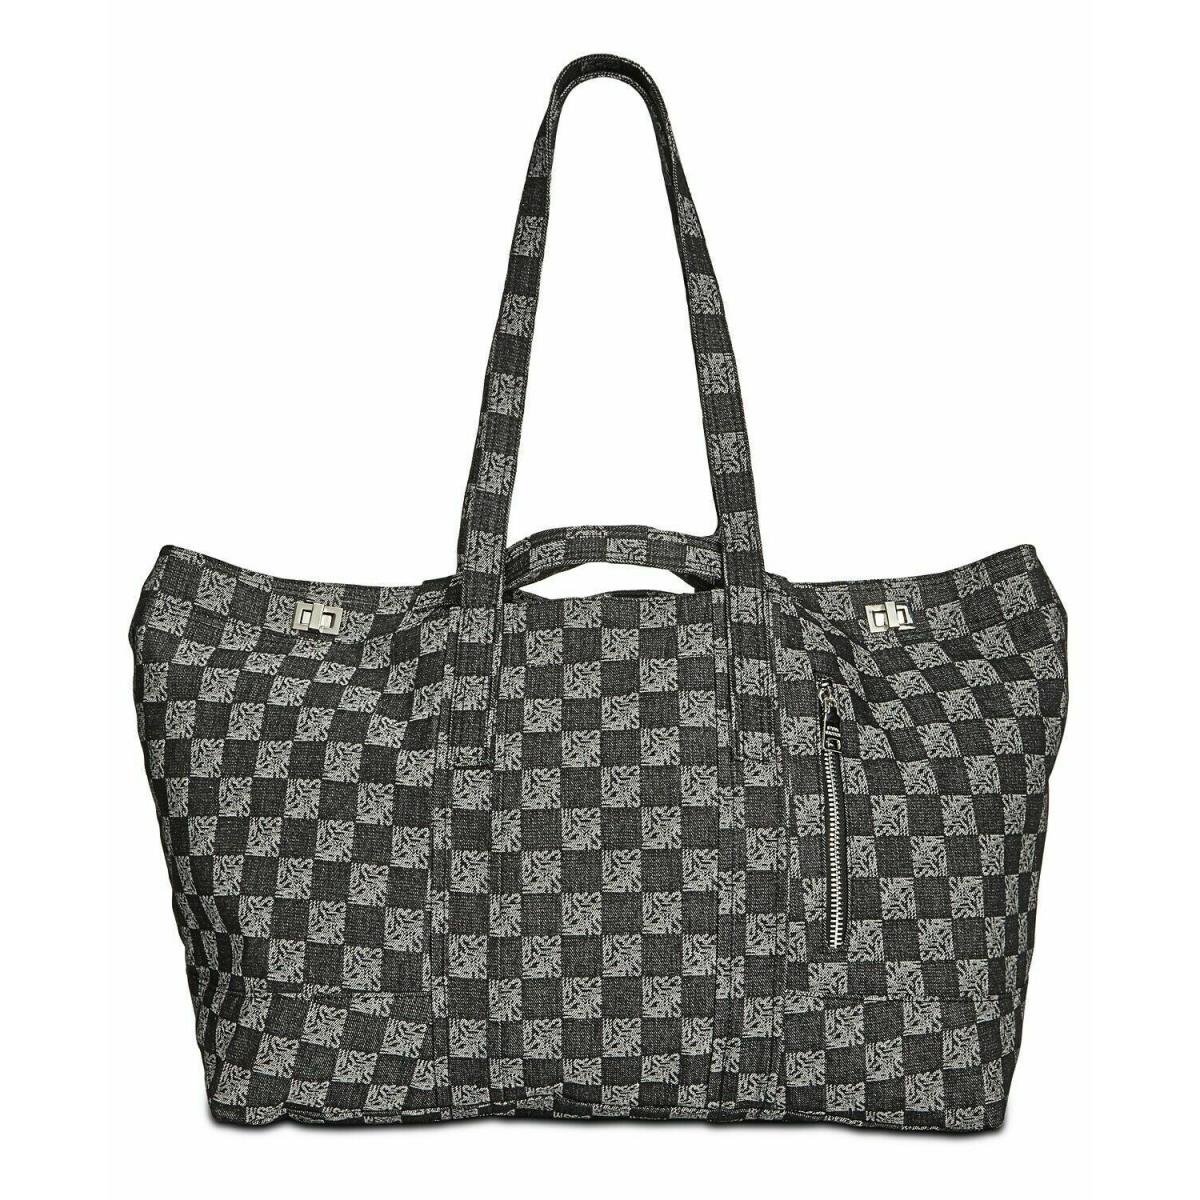 Steve Madden Darla Extra Large Tote Black and Silver - Exterior: Black